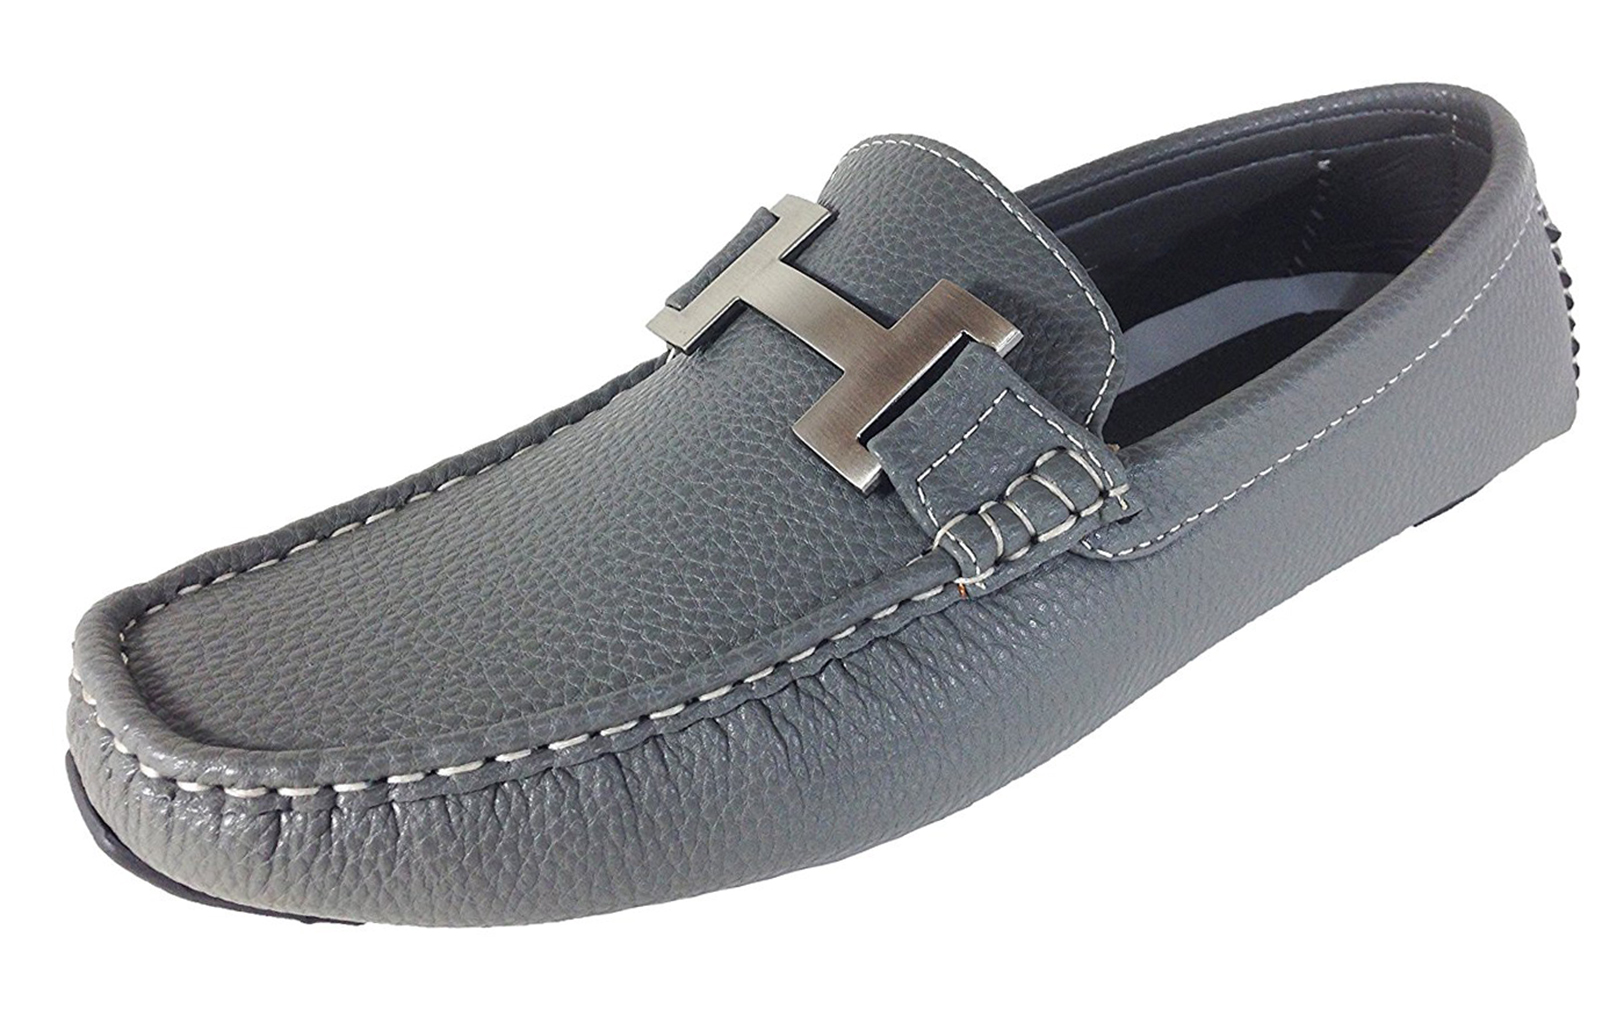 Men's Driving Moccasins Loafers Moc Toe Metal Buckle Casual Slip On Shoes - image 1 of 1